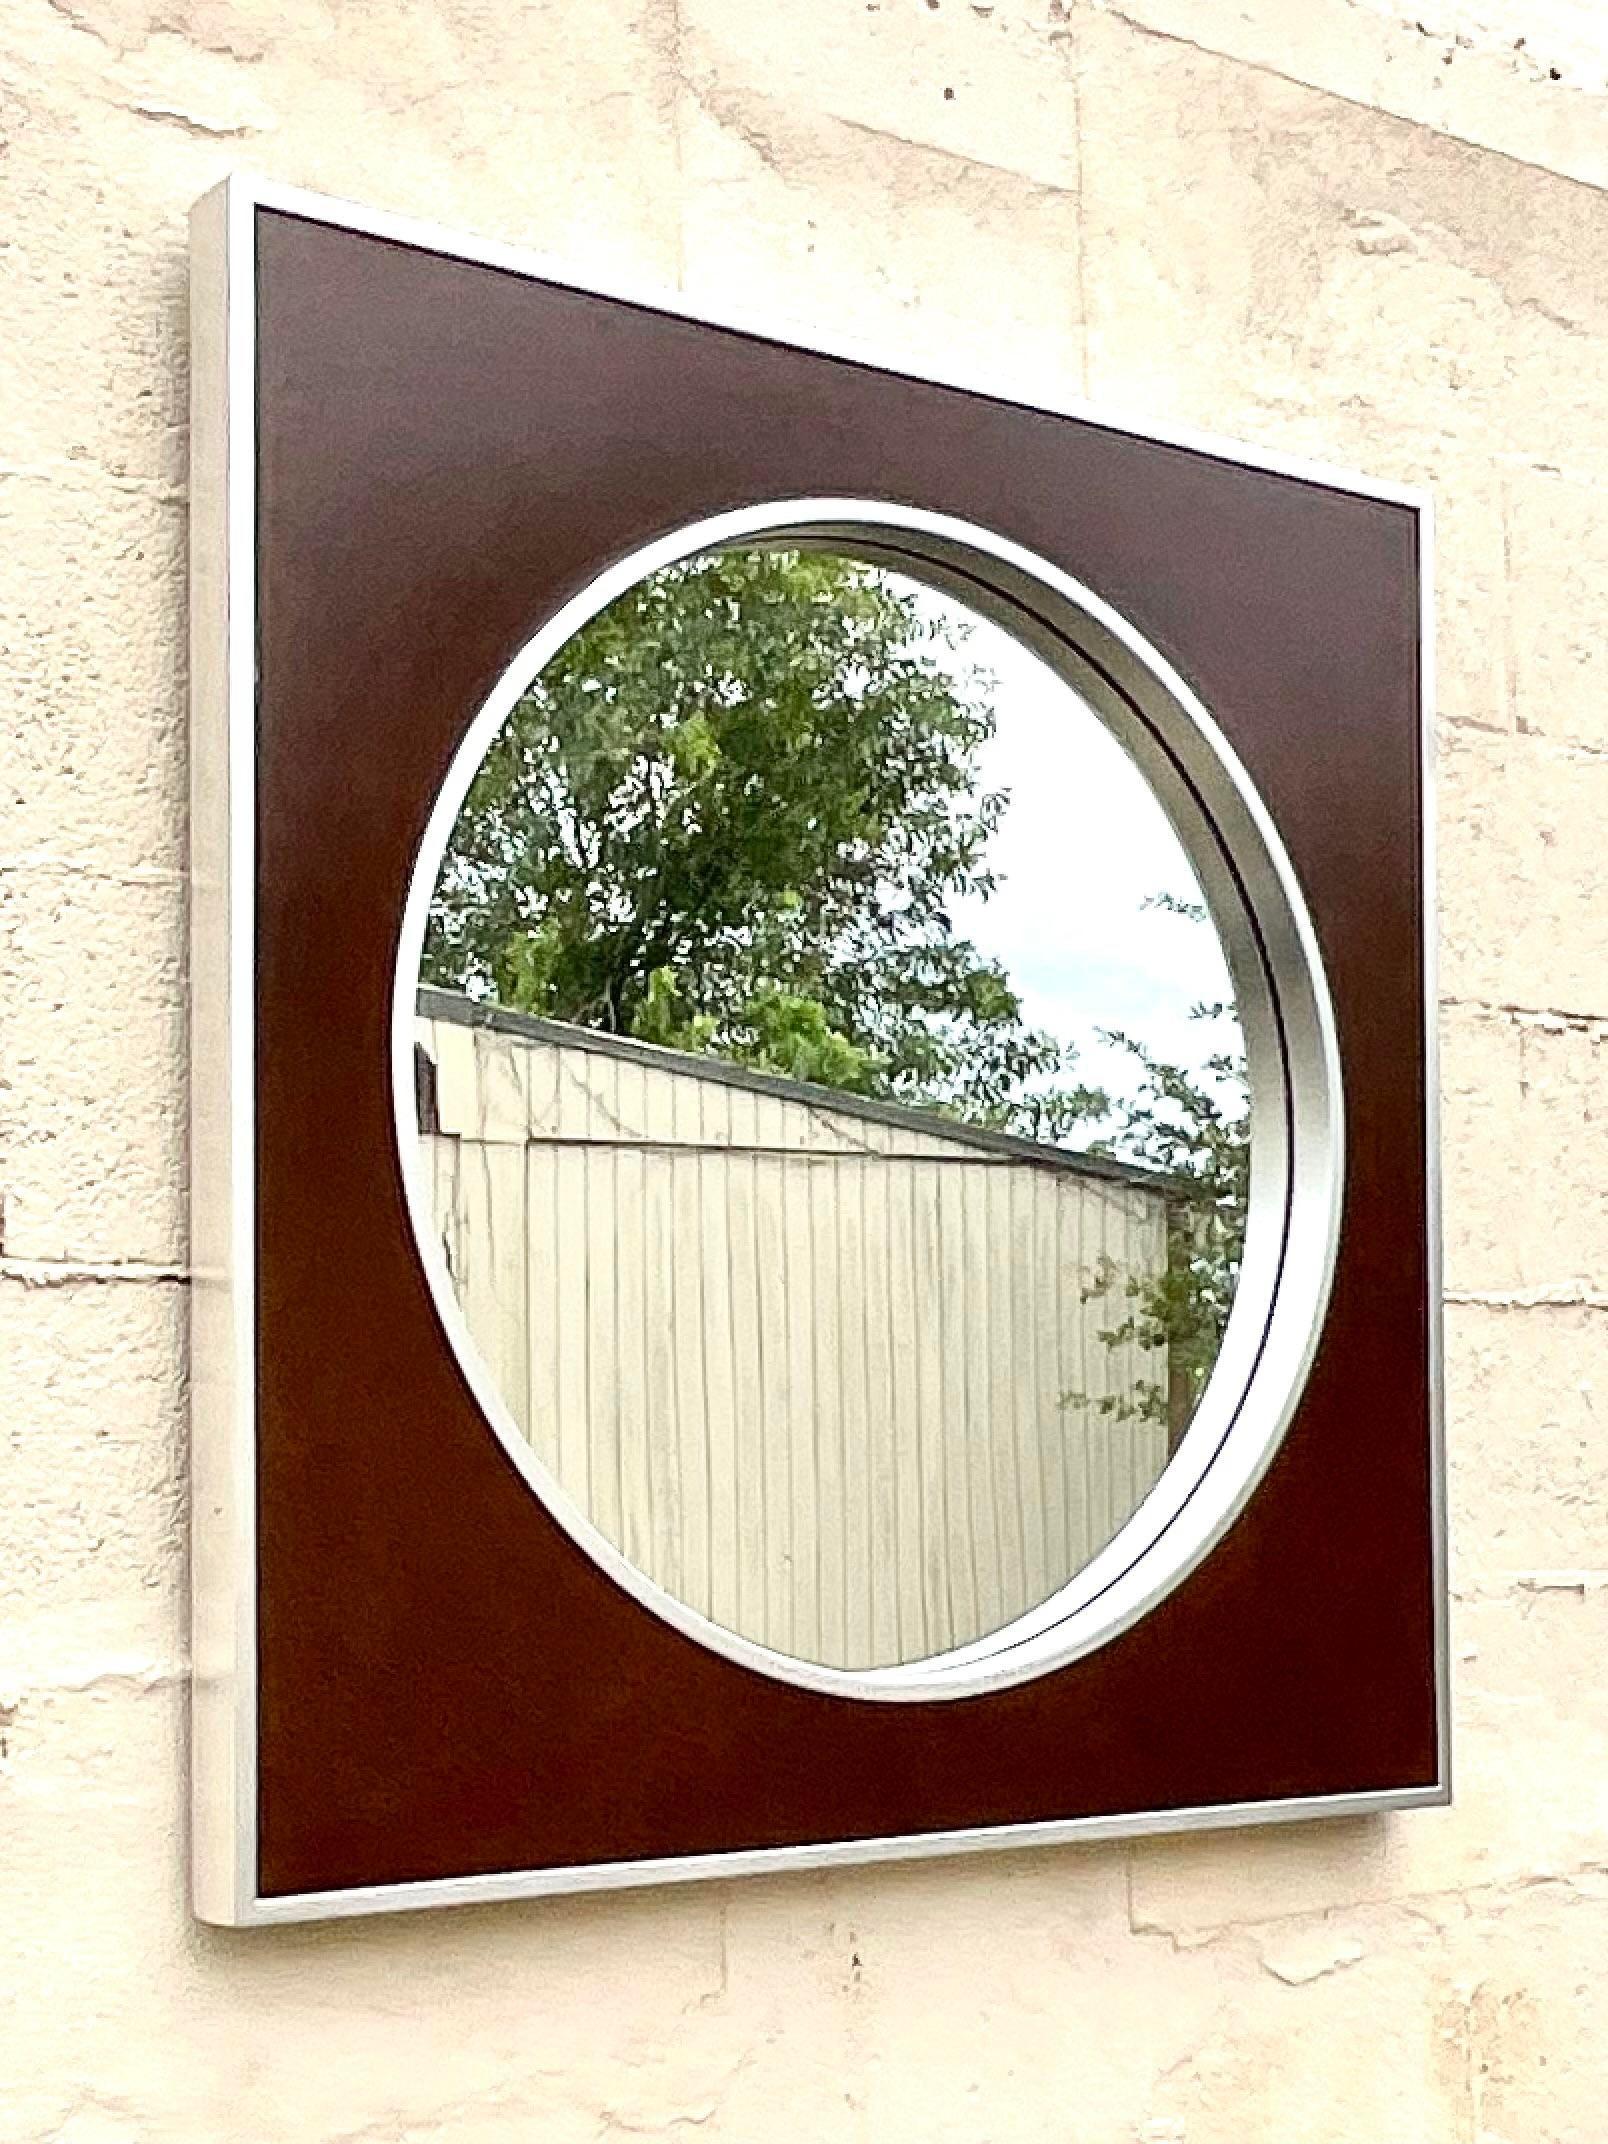 Fantastic vintage Contemporary wall mirror. Beautiful wood frame with a circle in the square design. Brushed chrome frame. Made by the iconic Majestic Mirror Company.